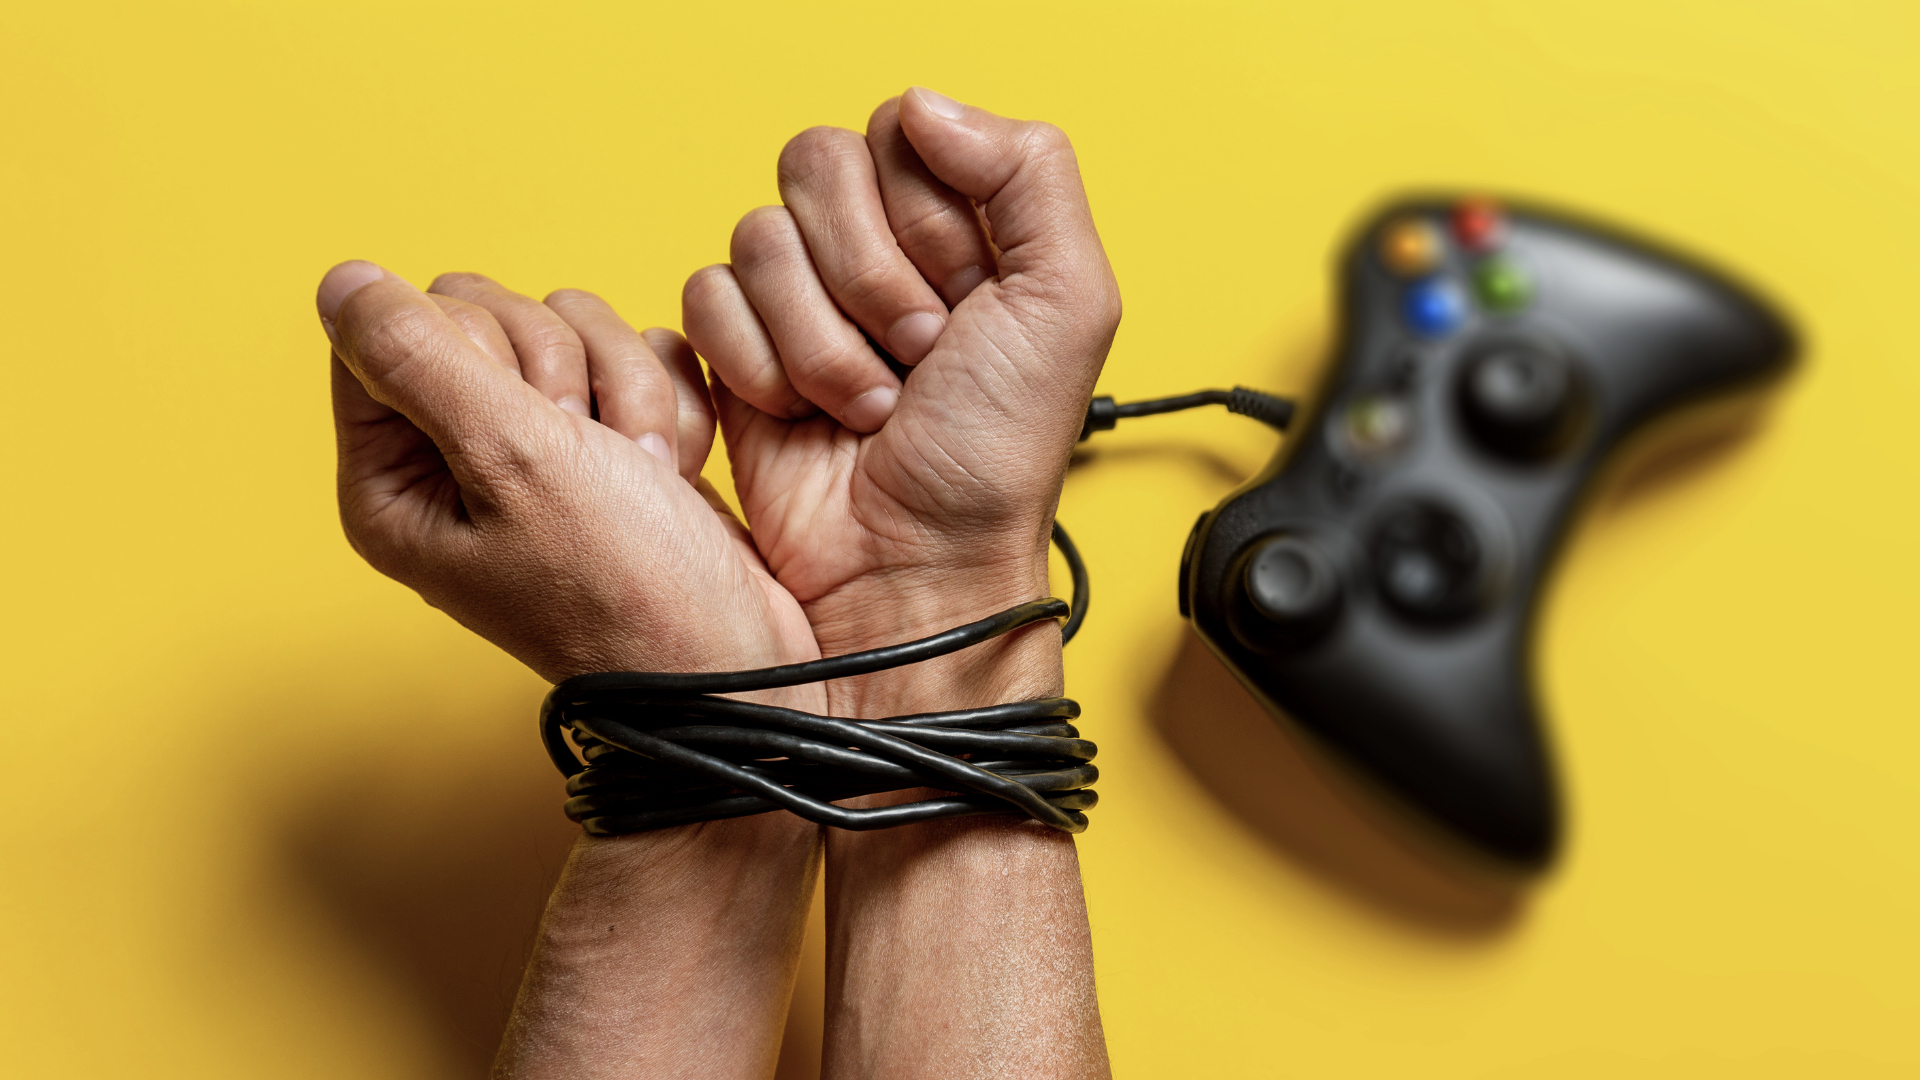 hands tied up with game controller